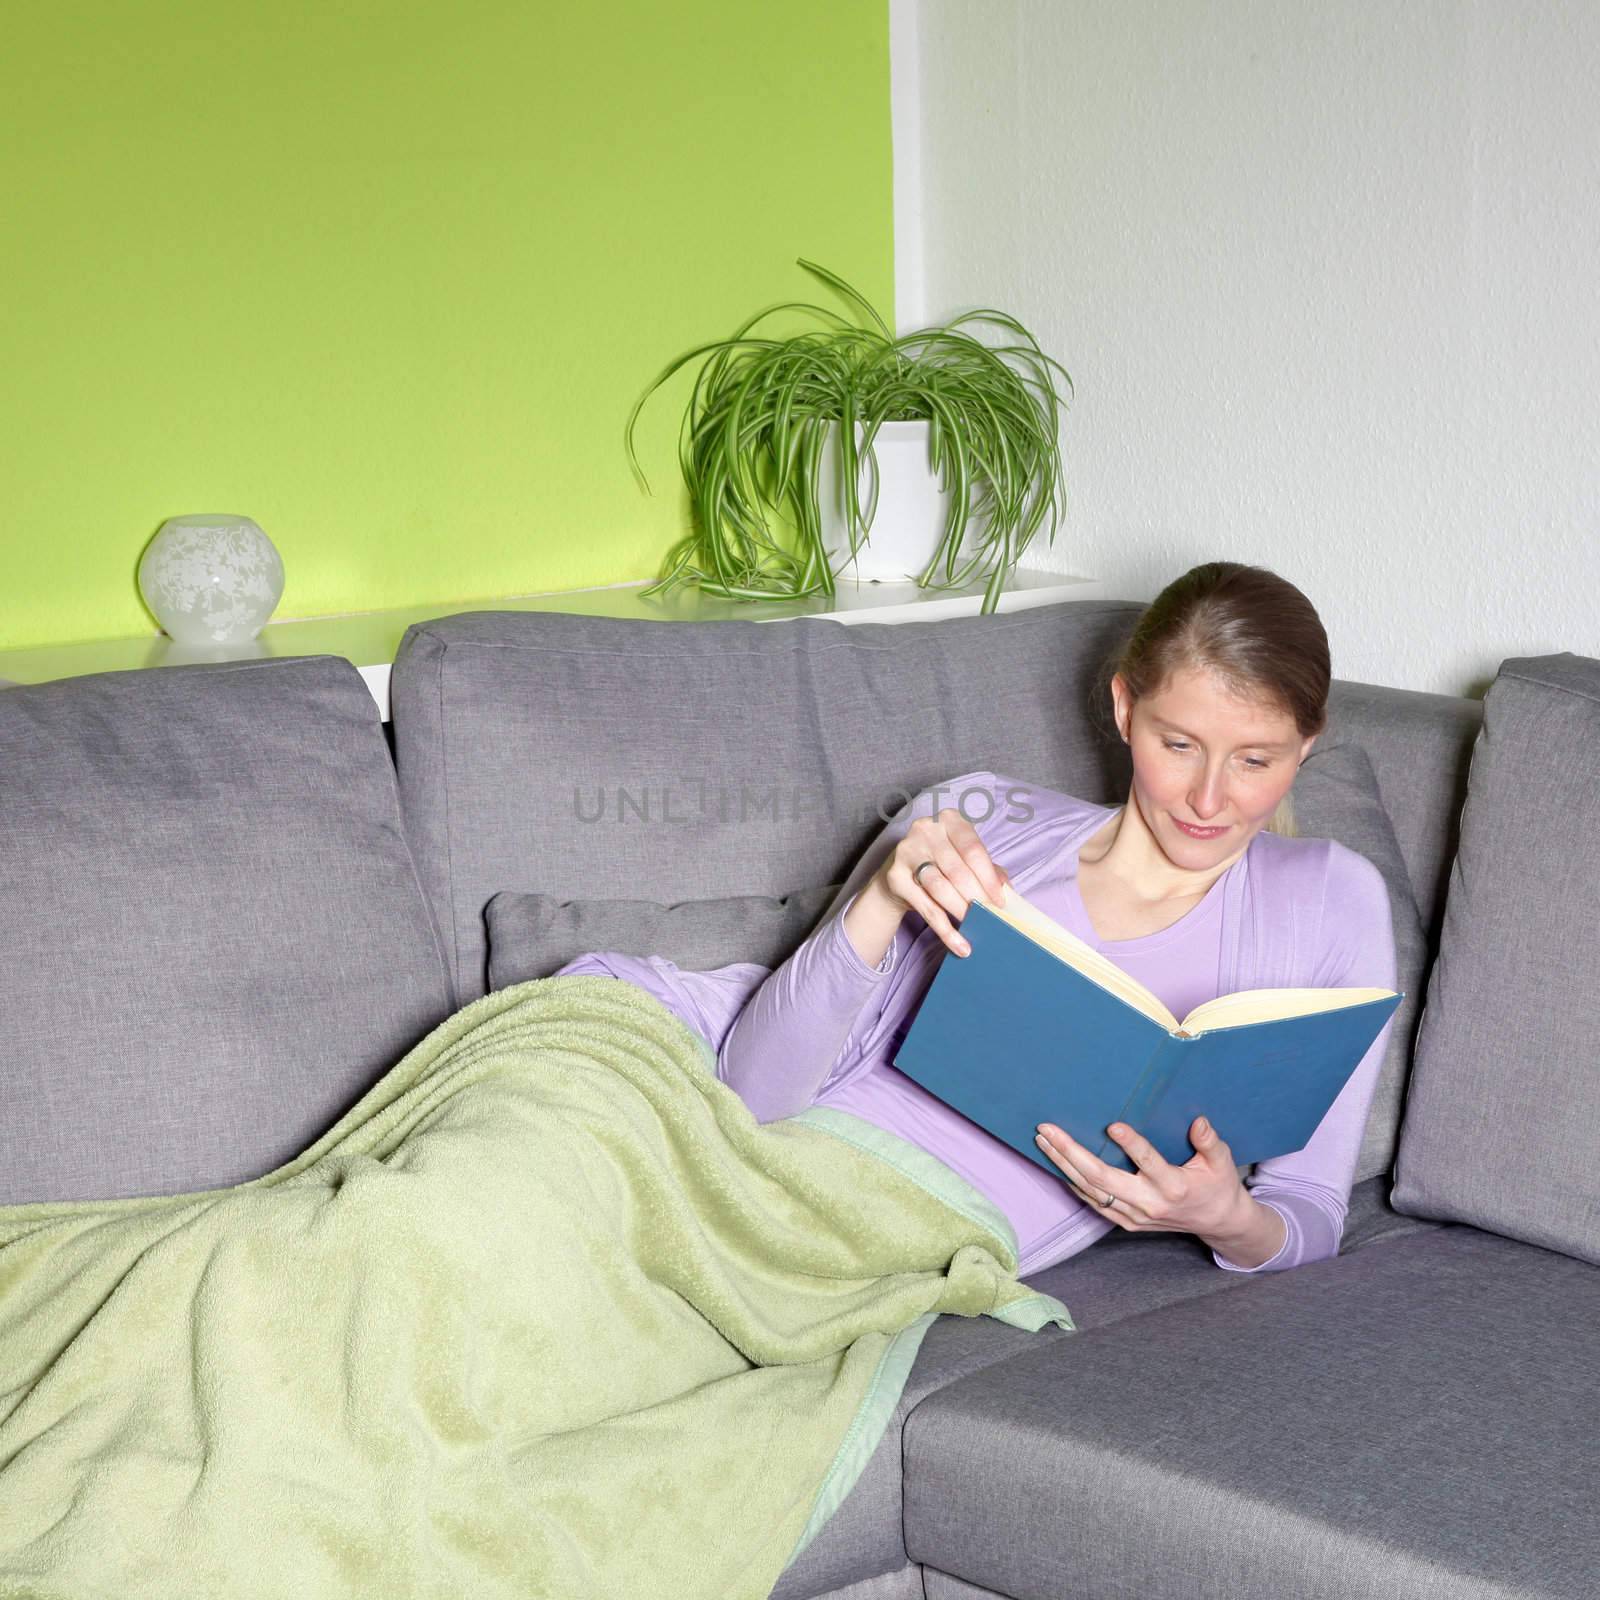 Attractive mature woman lying relaxing on a sofa in her living room with a blanket over her legs reading a book